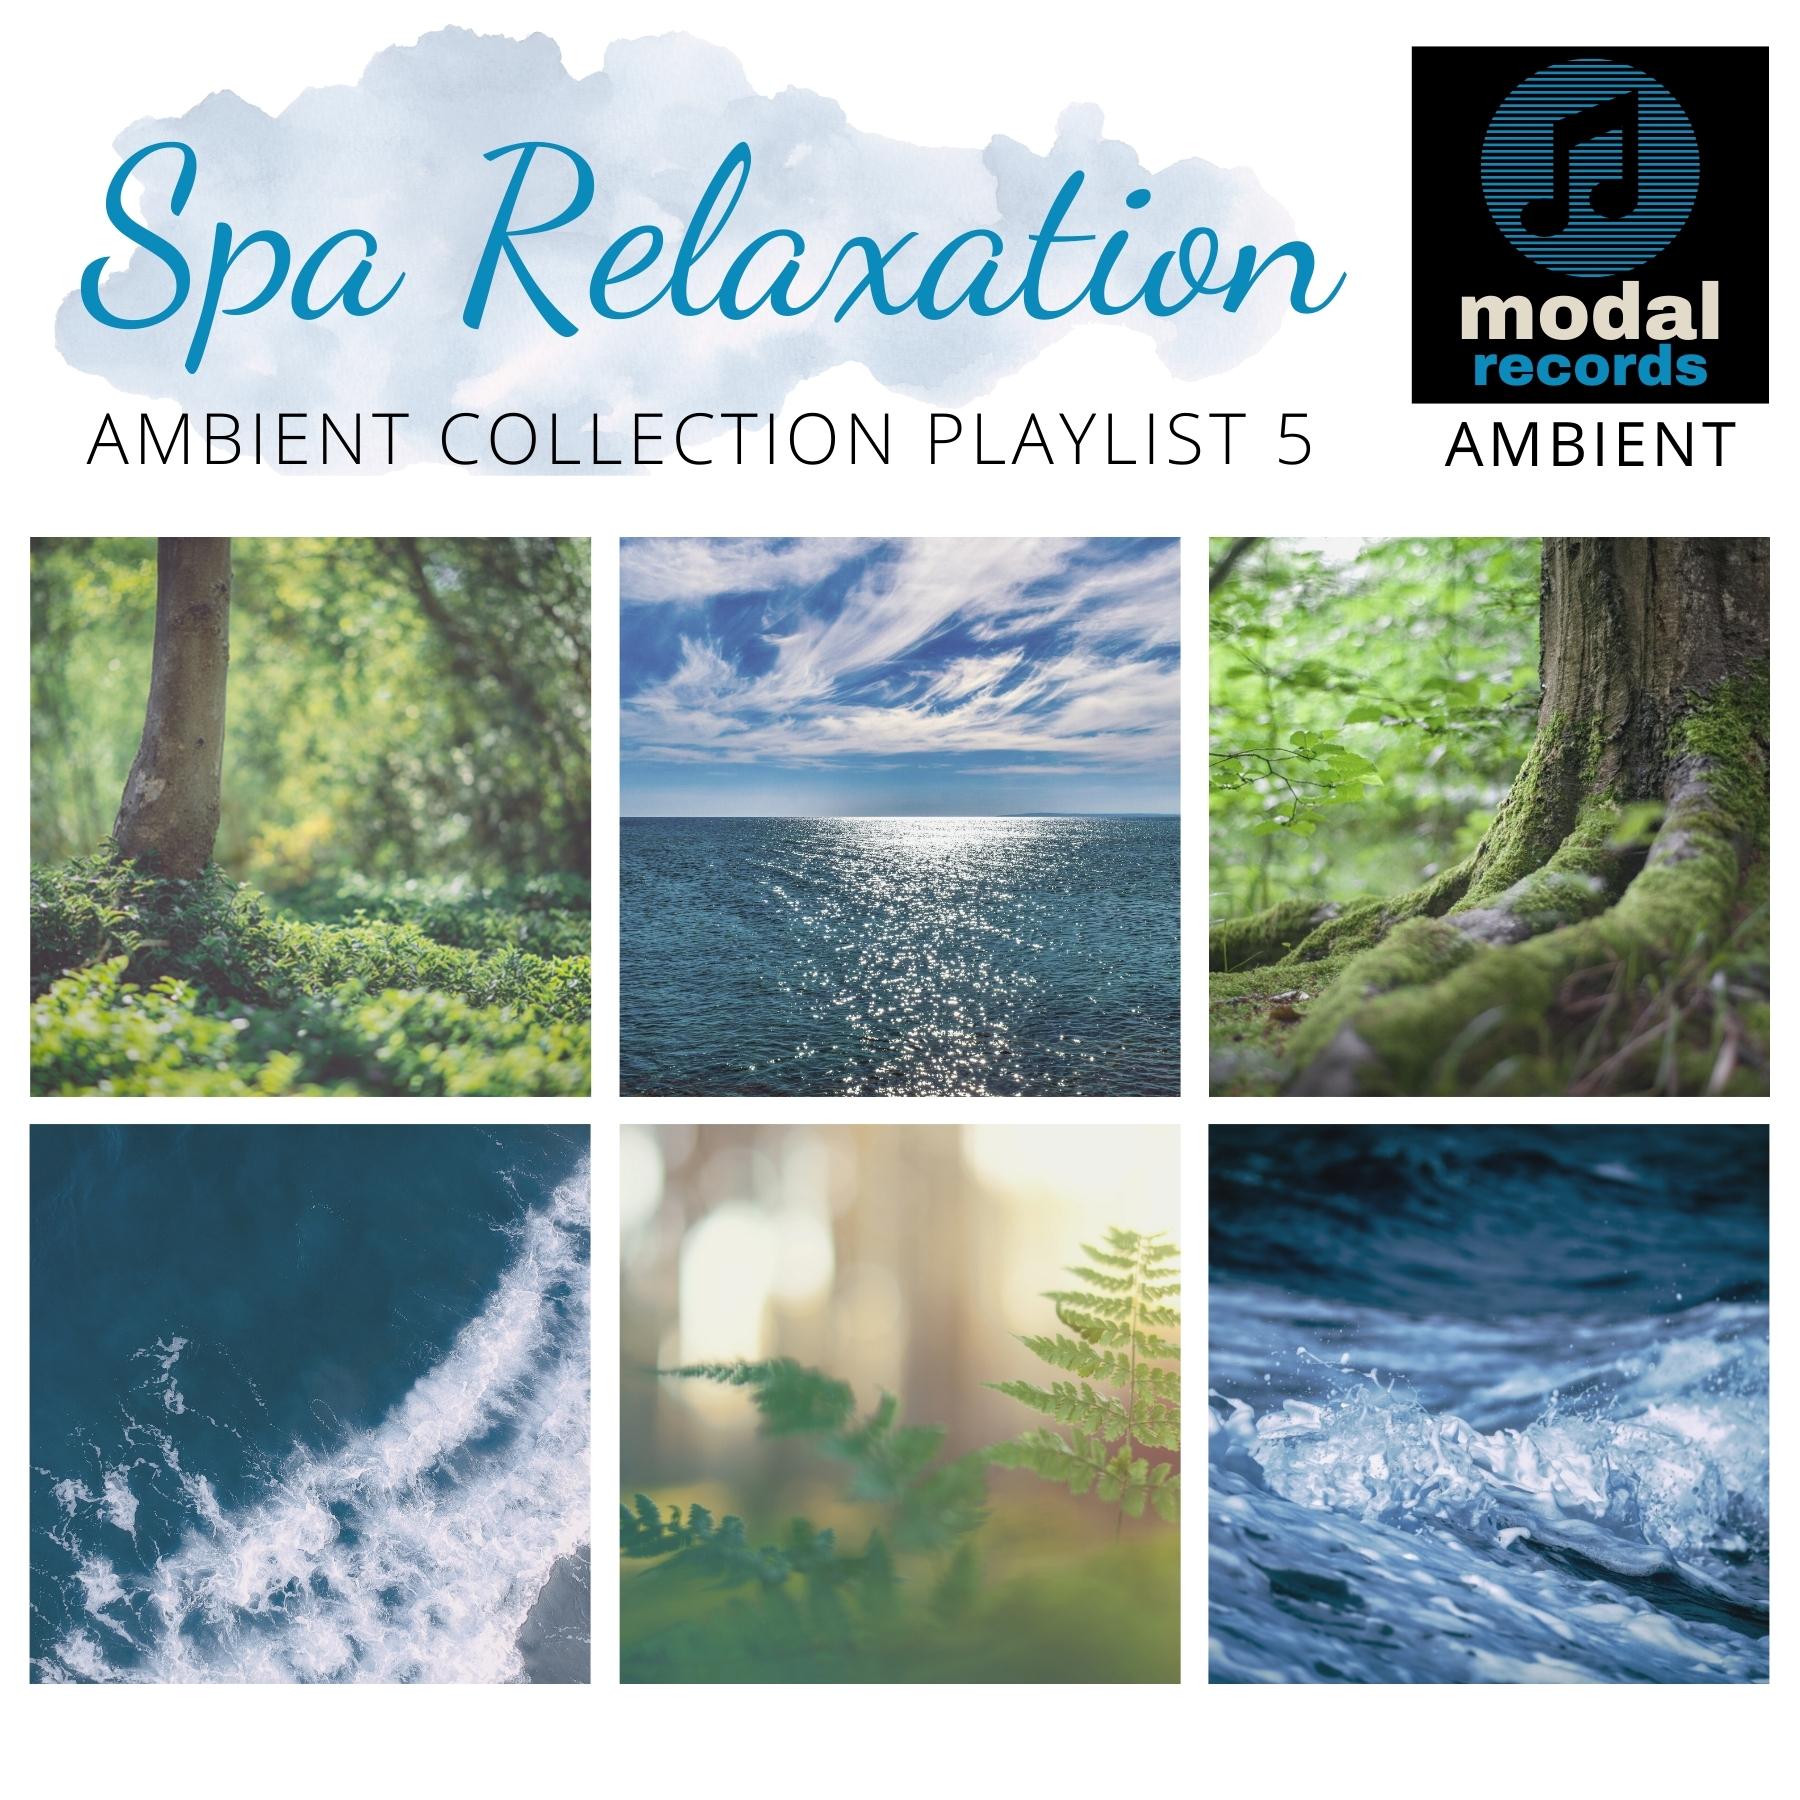 Modal Ambient Playlist - Spa Relaxation - Ambient Collection 5